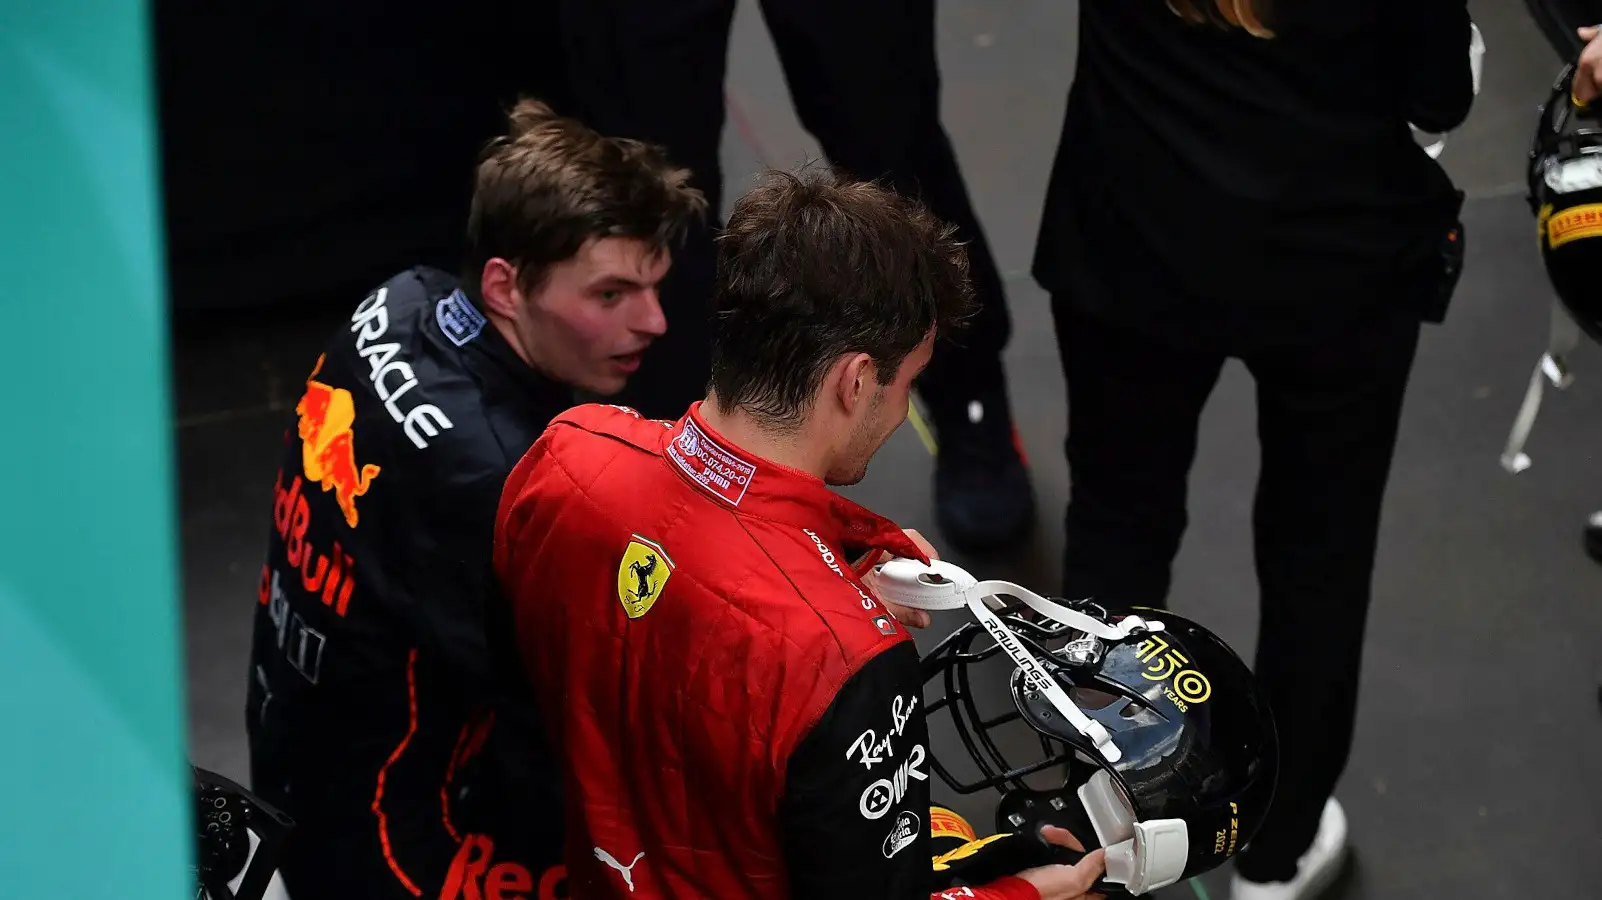 Charles Leclerc speaking with Max Verstappen before the podium ceremony. Miami May 2022